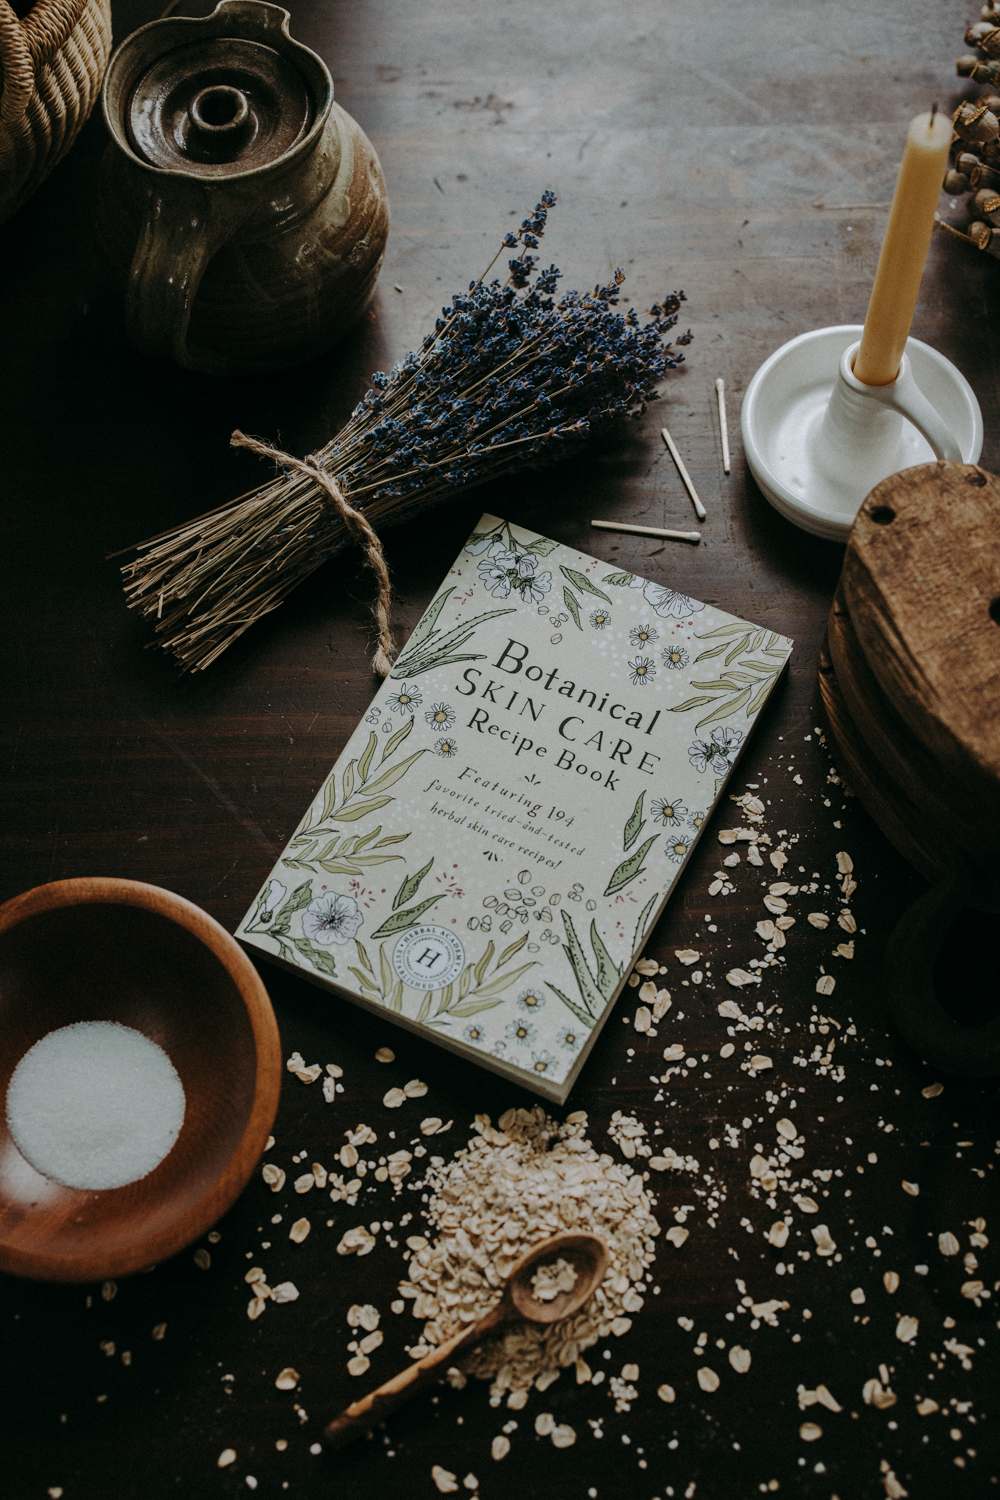  Botanical Skin Care Recipe Book and herbs on a table